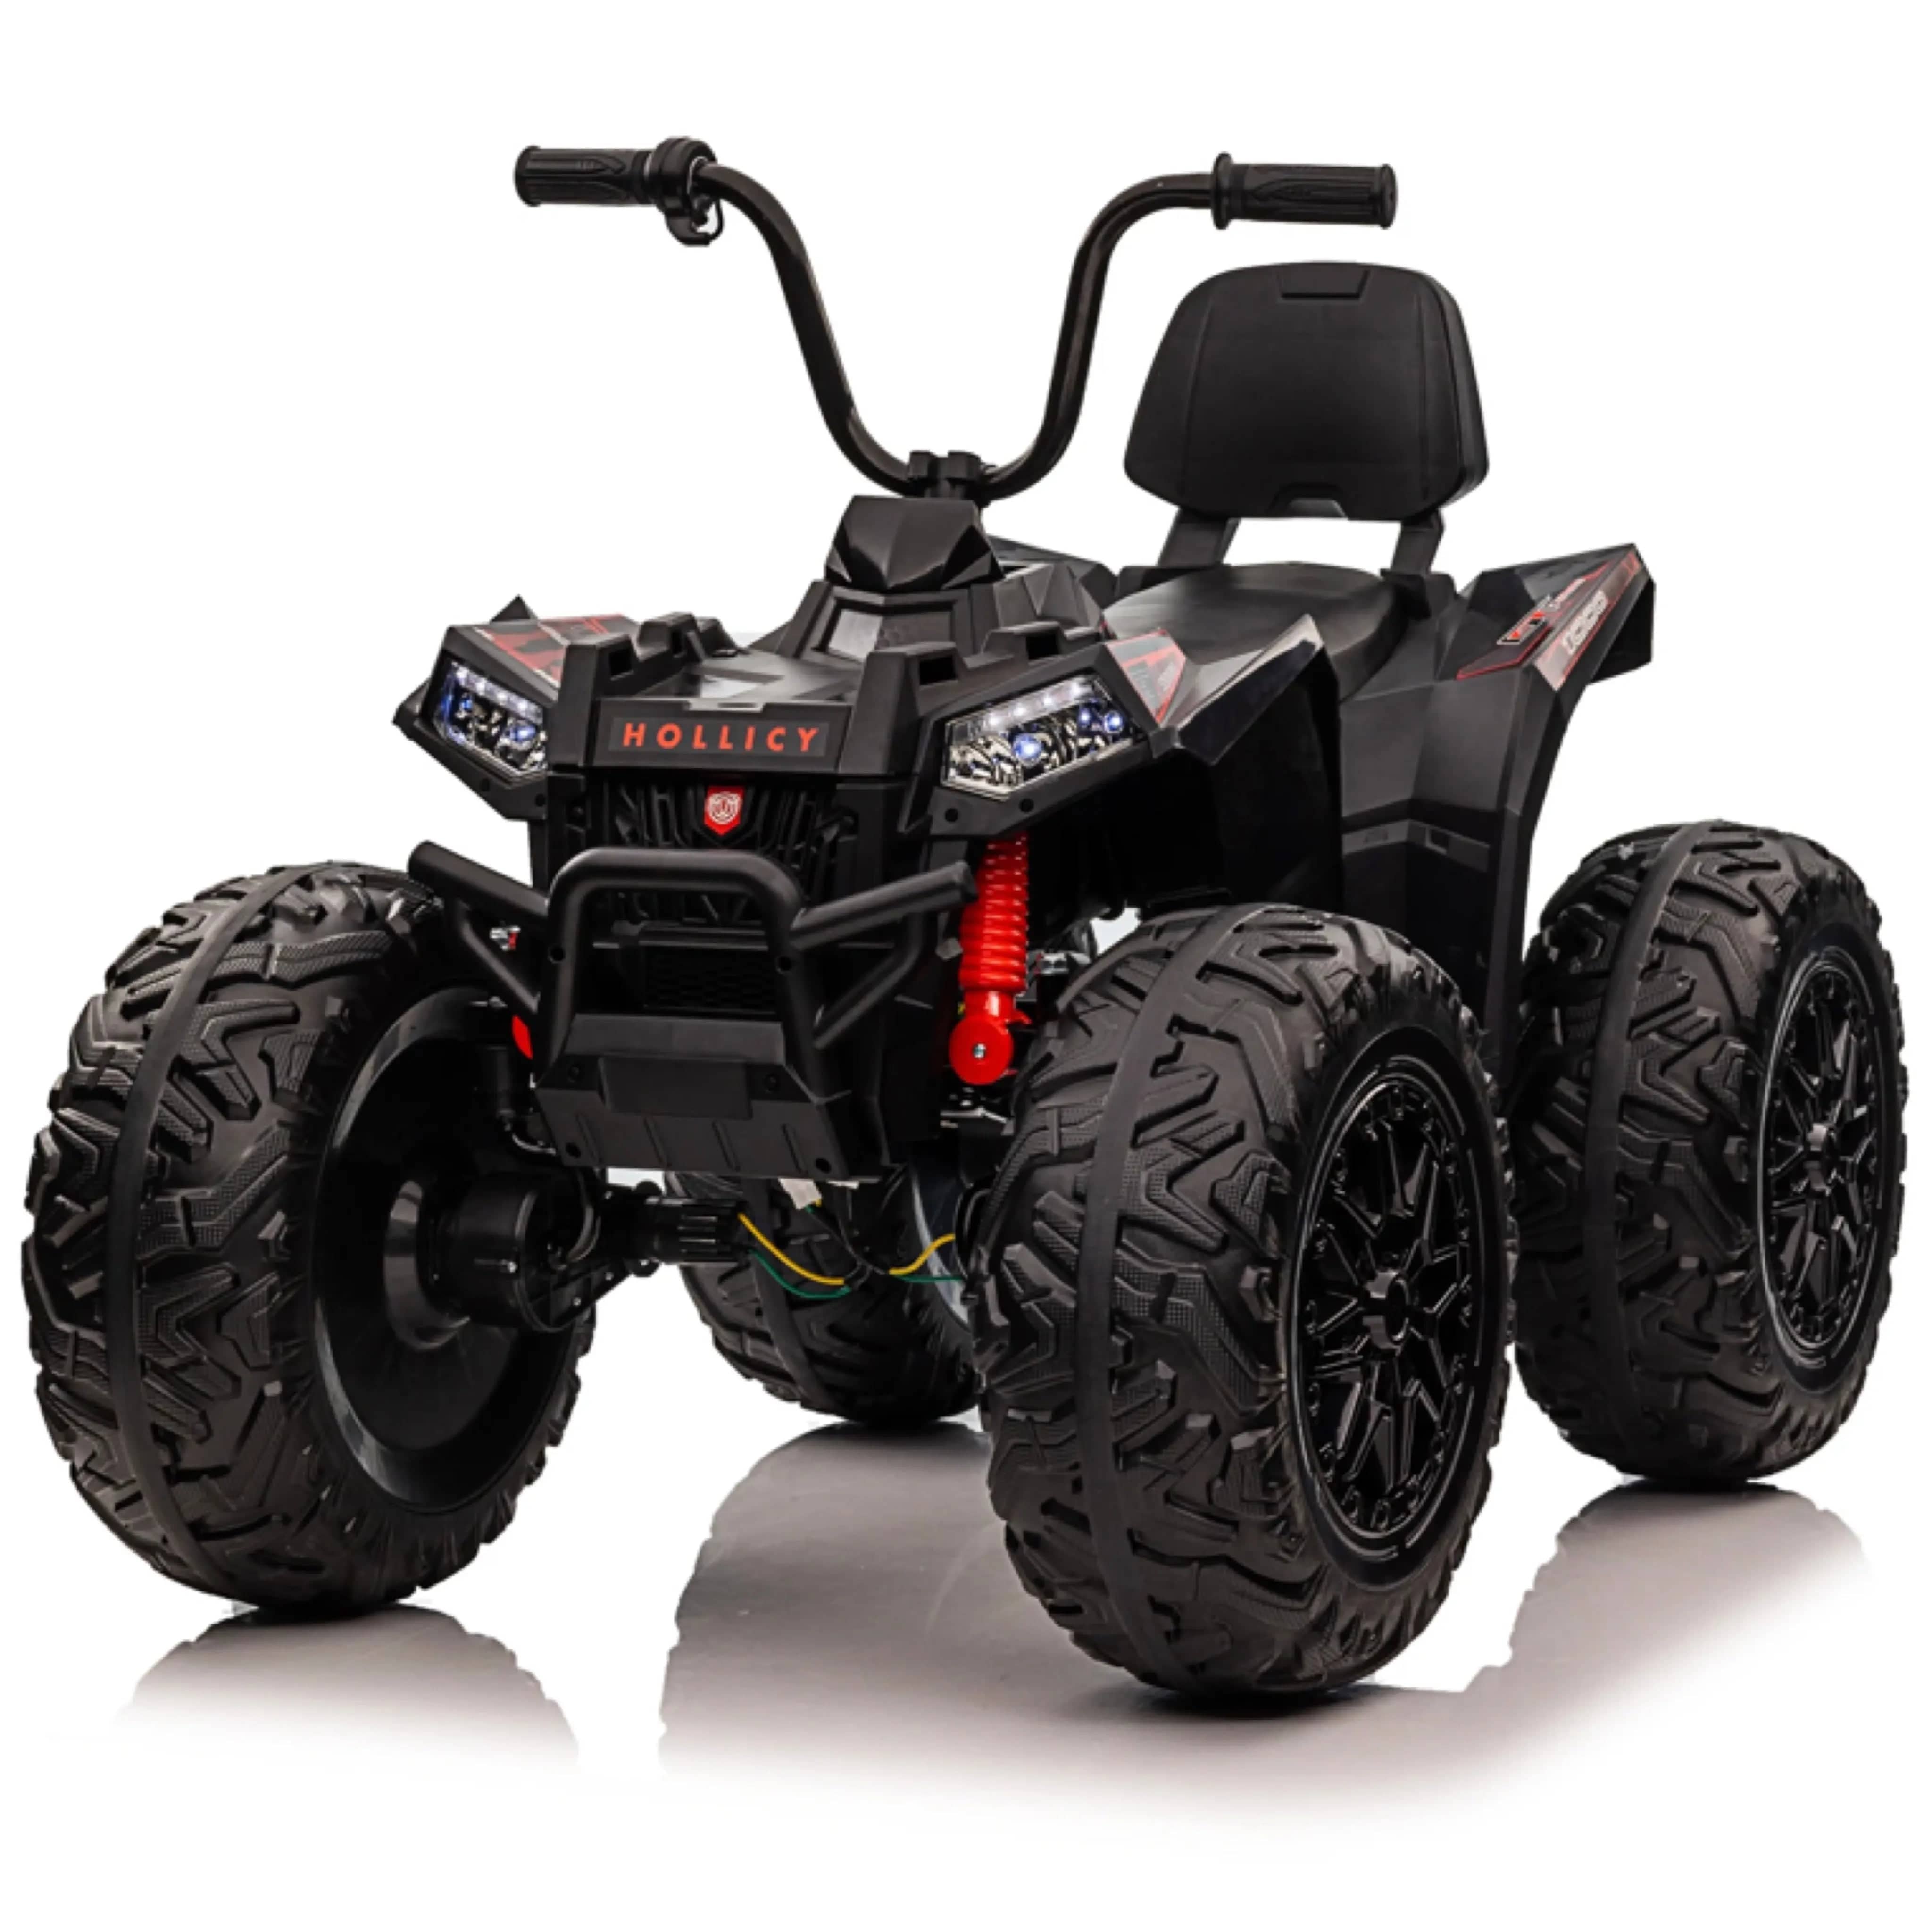 24V 4x4 Off-road ATV Kids Ride On Car with Monster Tires, 4-Wheel Suspension, Realistic Lights, Bluetooth MP3 and Leather Seat - Upgraded Power Wheels ATV R&G TOYS